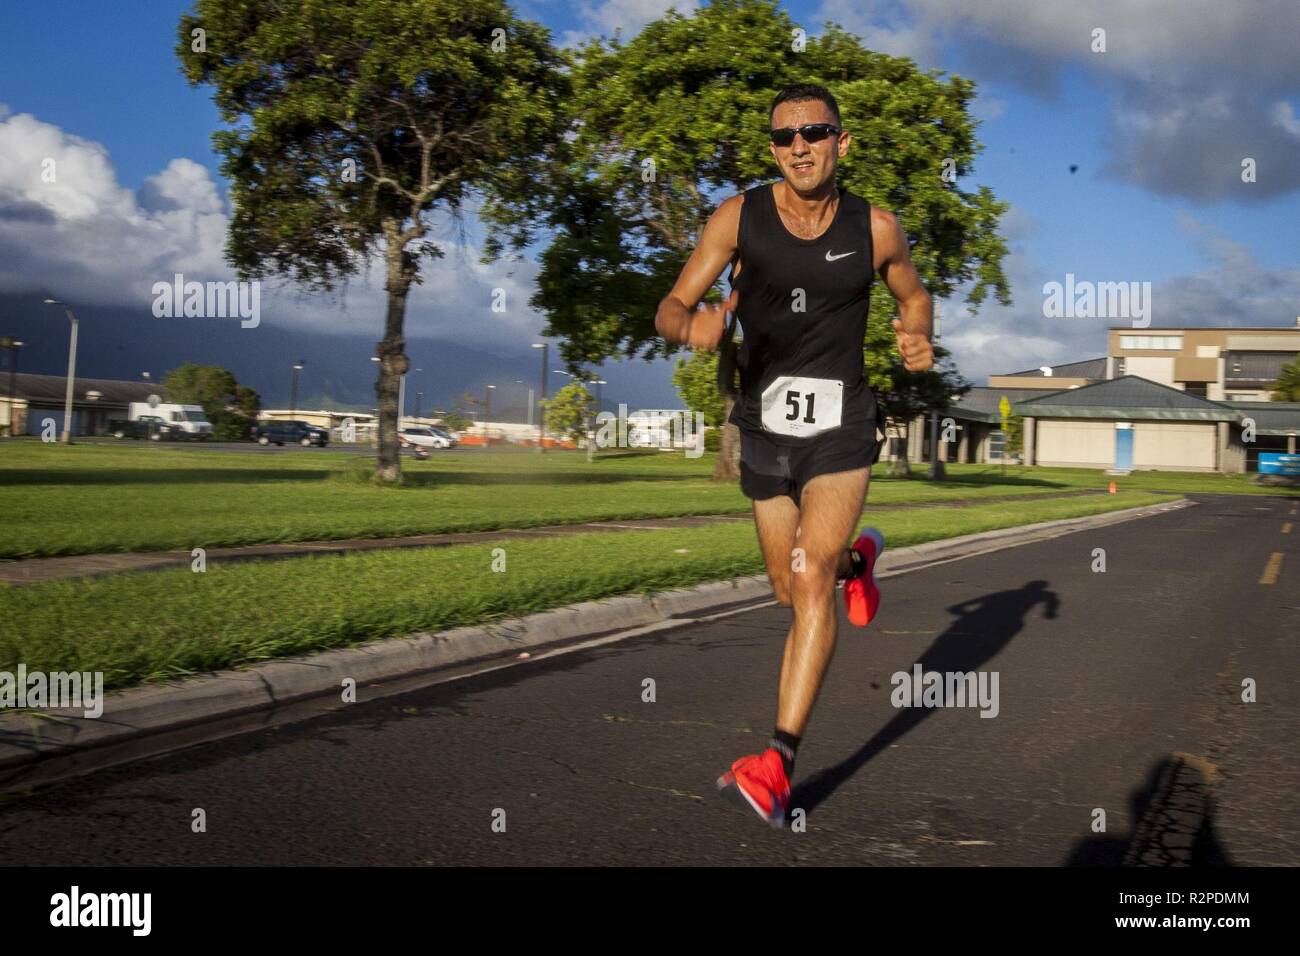 A contestant runs during the Turkey Trot 5k and 10k run, Marine Corps Base Hawaii, Nov. 3, 2018. The event, hosted by 3rd Radio Battalion and Marine Corps Community Services Hawaii, is an annual Thanksgiving-themed event that is open to U.S. Service members, their families, and civilian participants. The event promotes readiness and resiliency across the installation and local community by encouraging healthy, family-oriented activity. Stock Photo